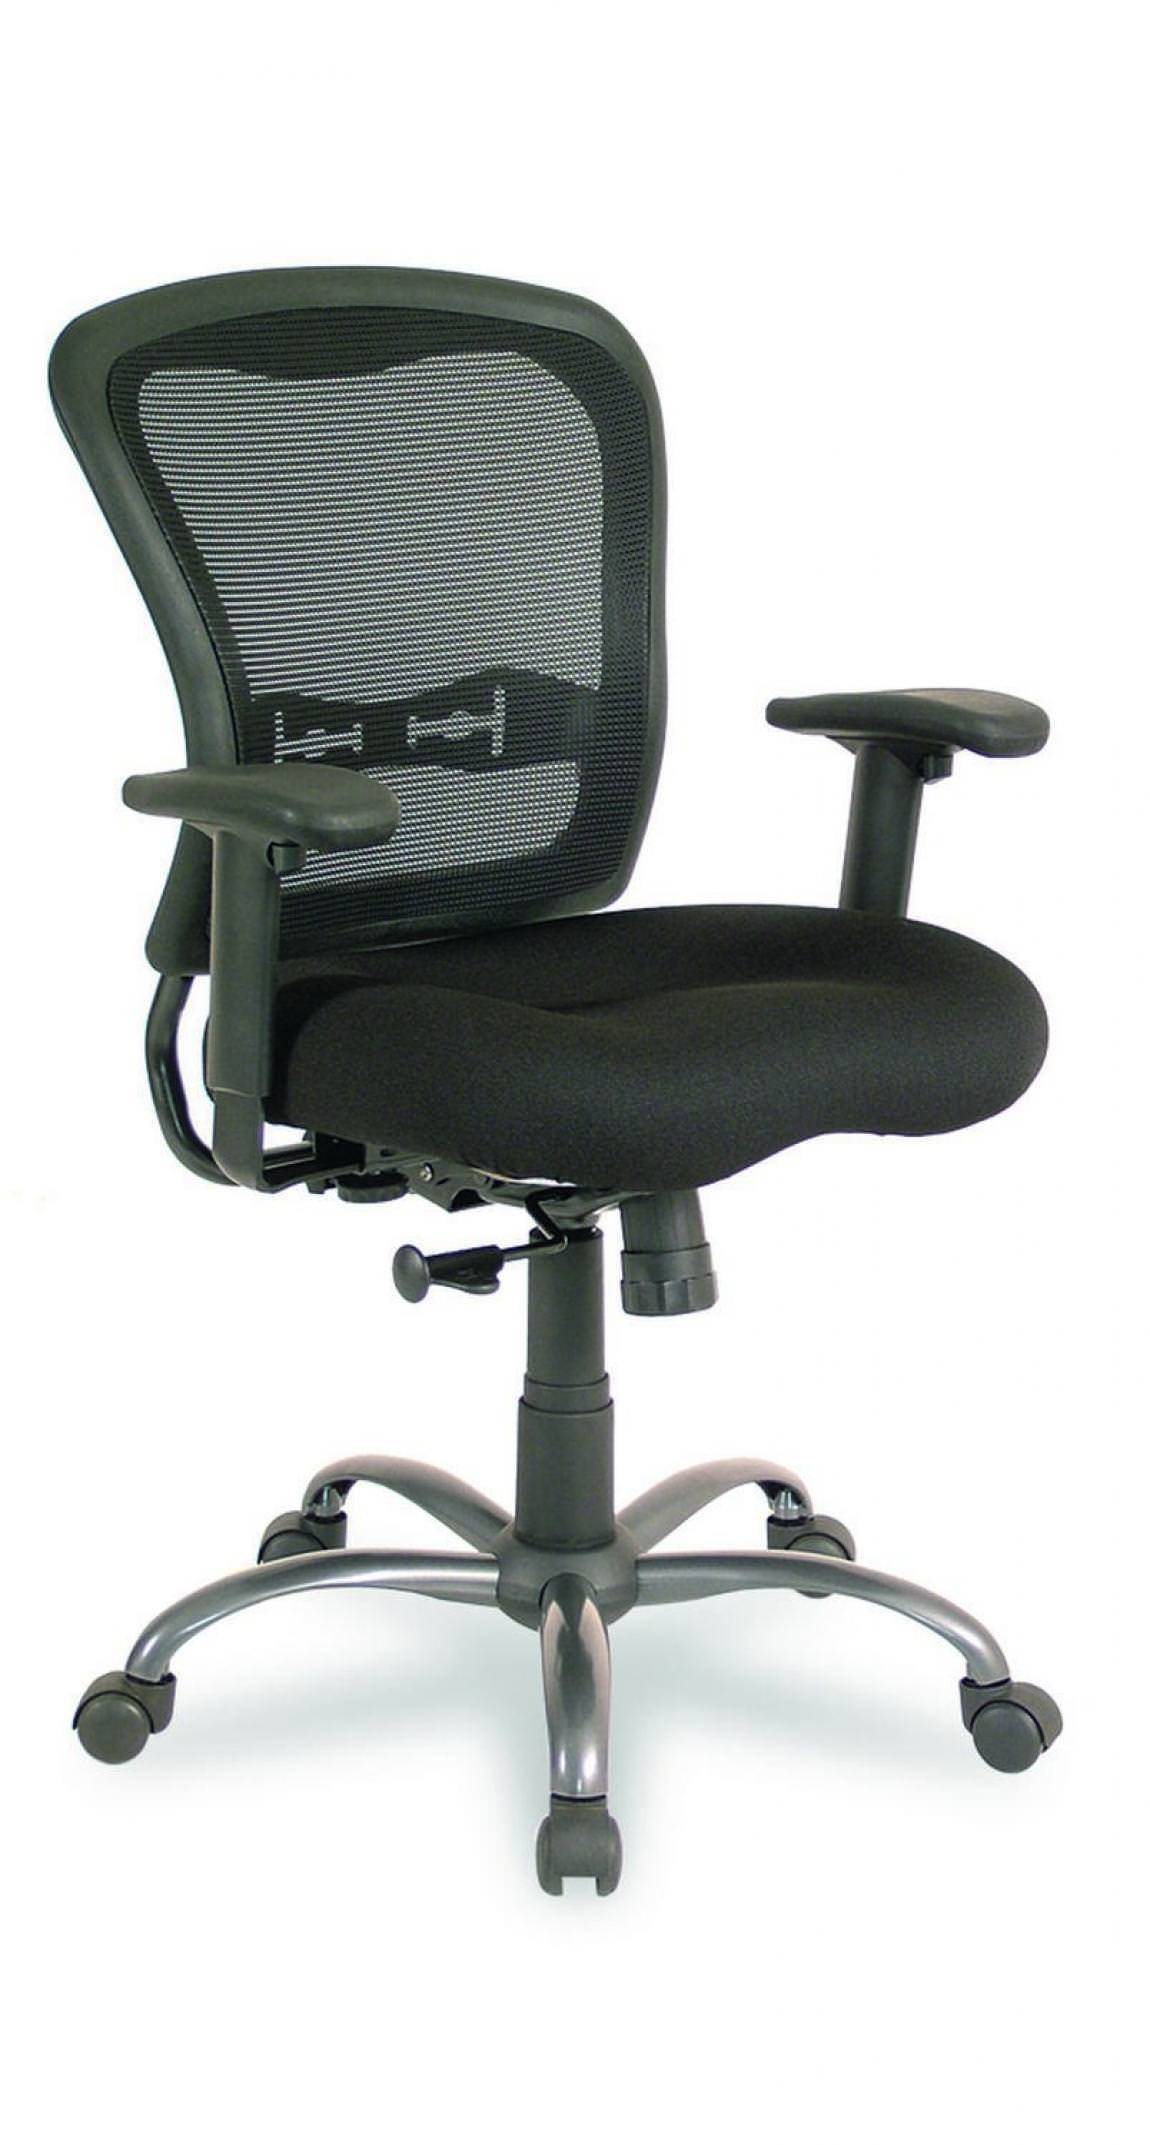 Black Mesh Back Office Chair Arms and Titanium Base : Harmony Collection